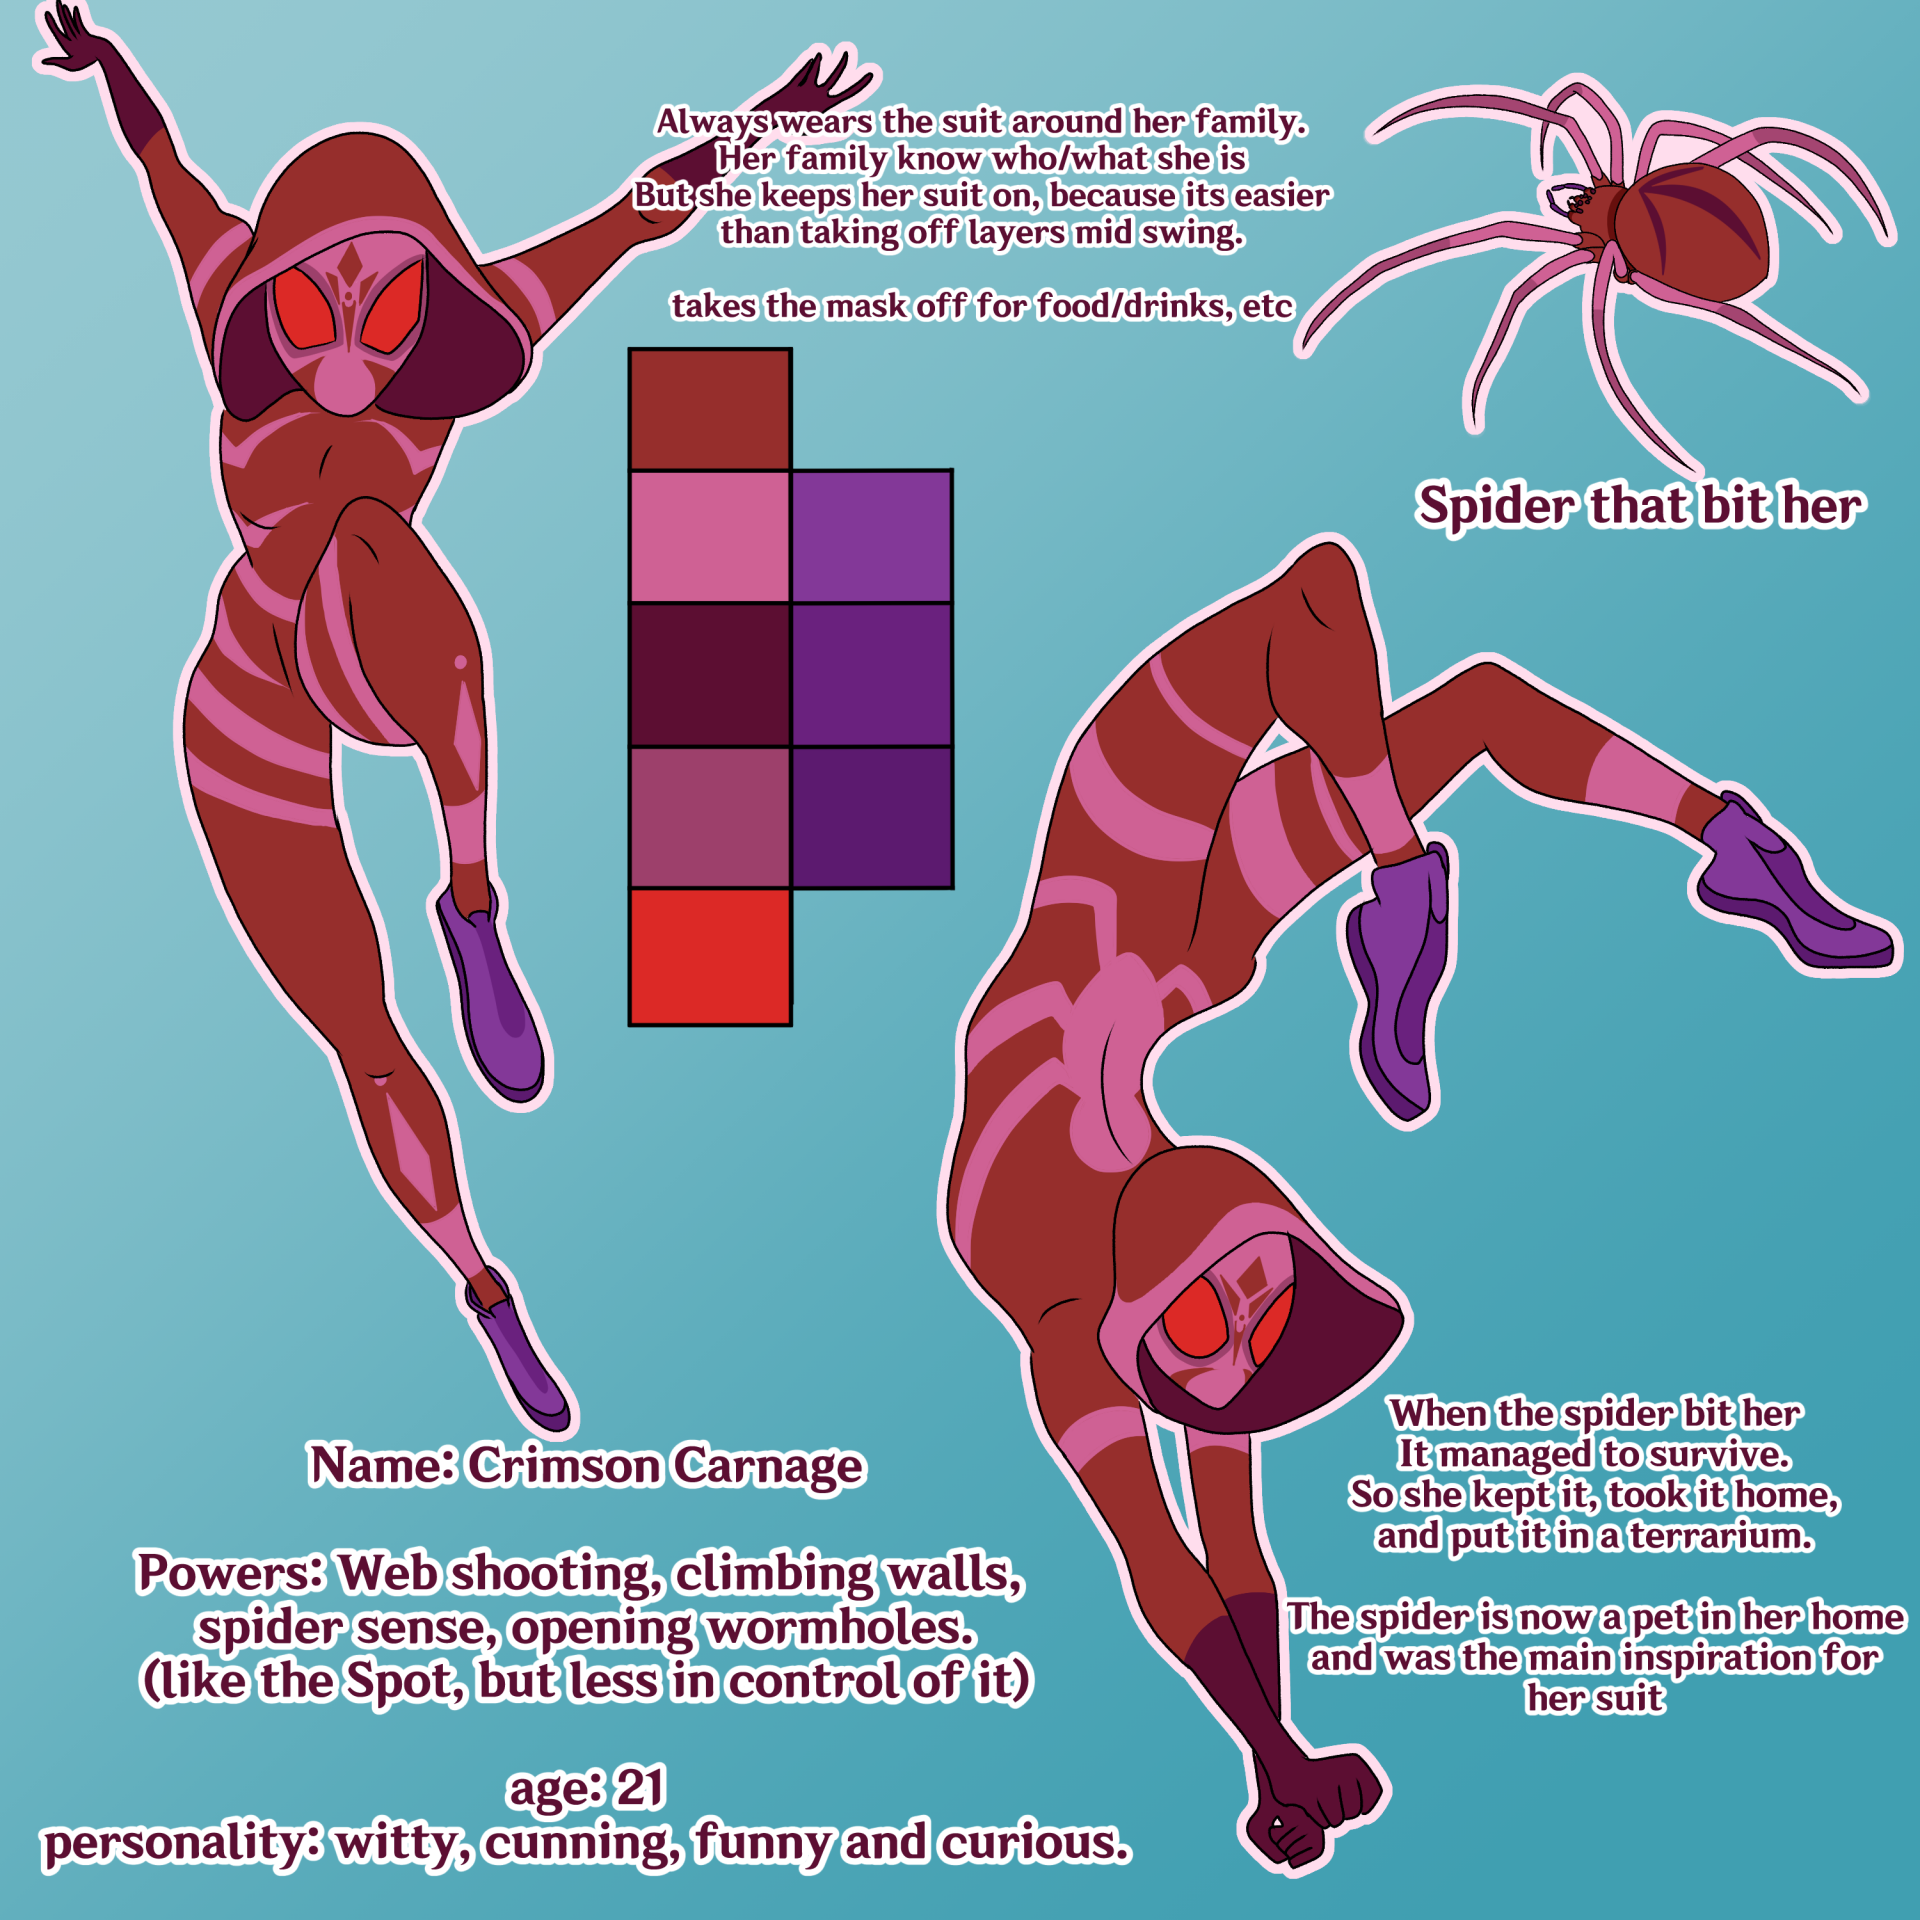 I designed a Spidersona, as well as a few of their Rogue's Gallery